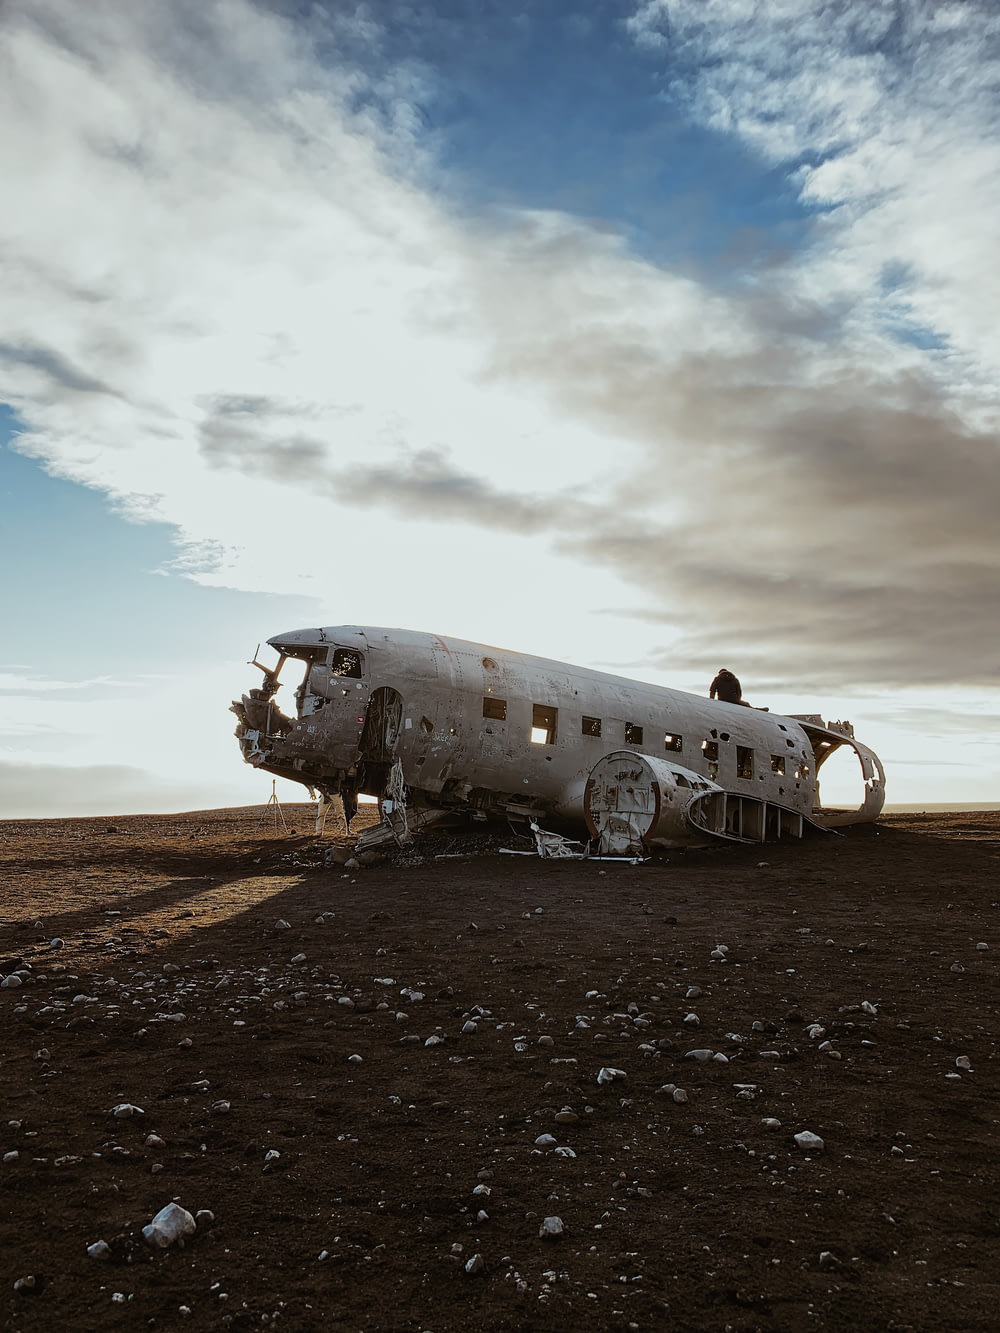 wrecked and abandoned airplane on dirt field